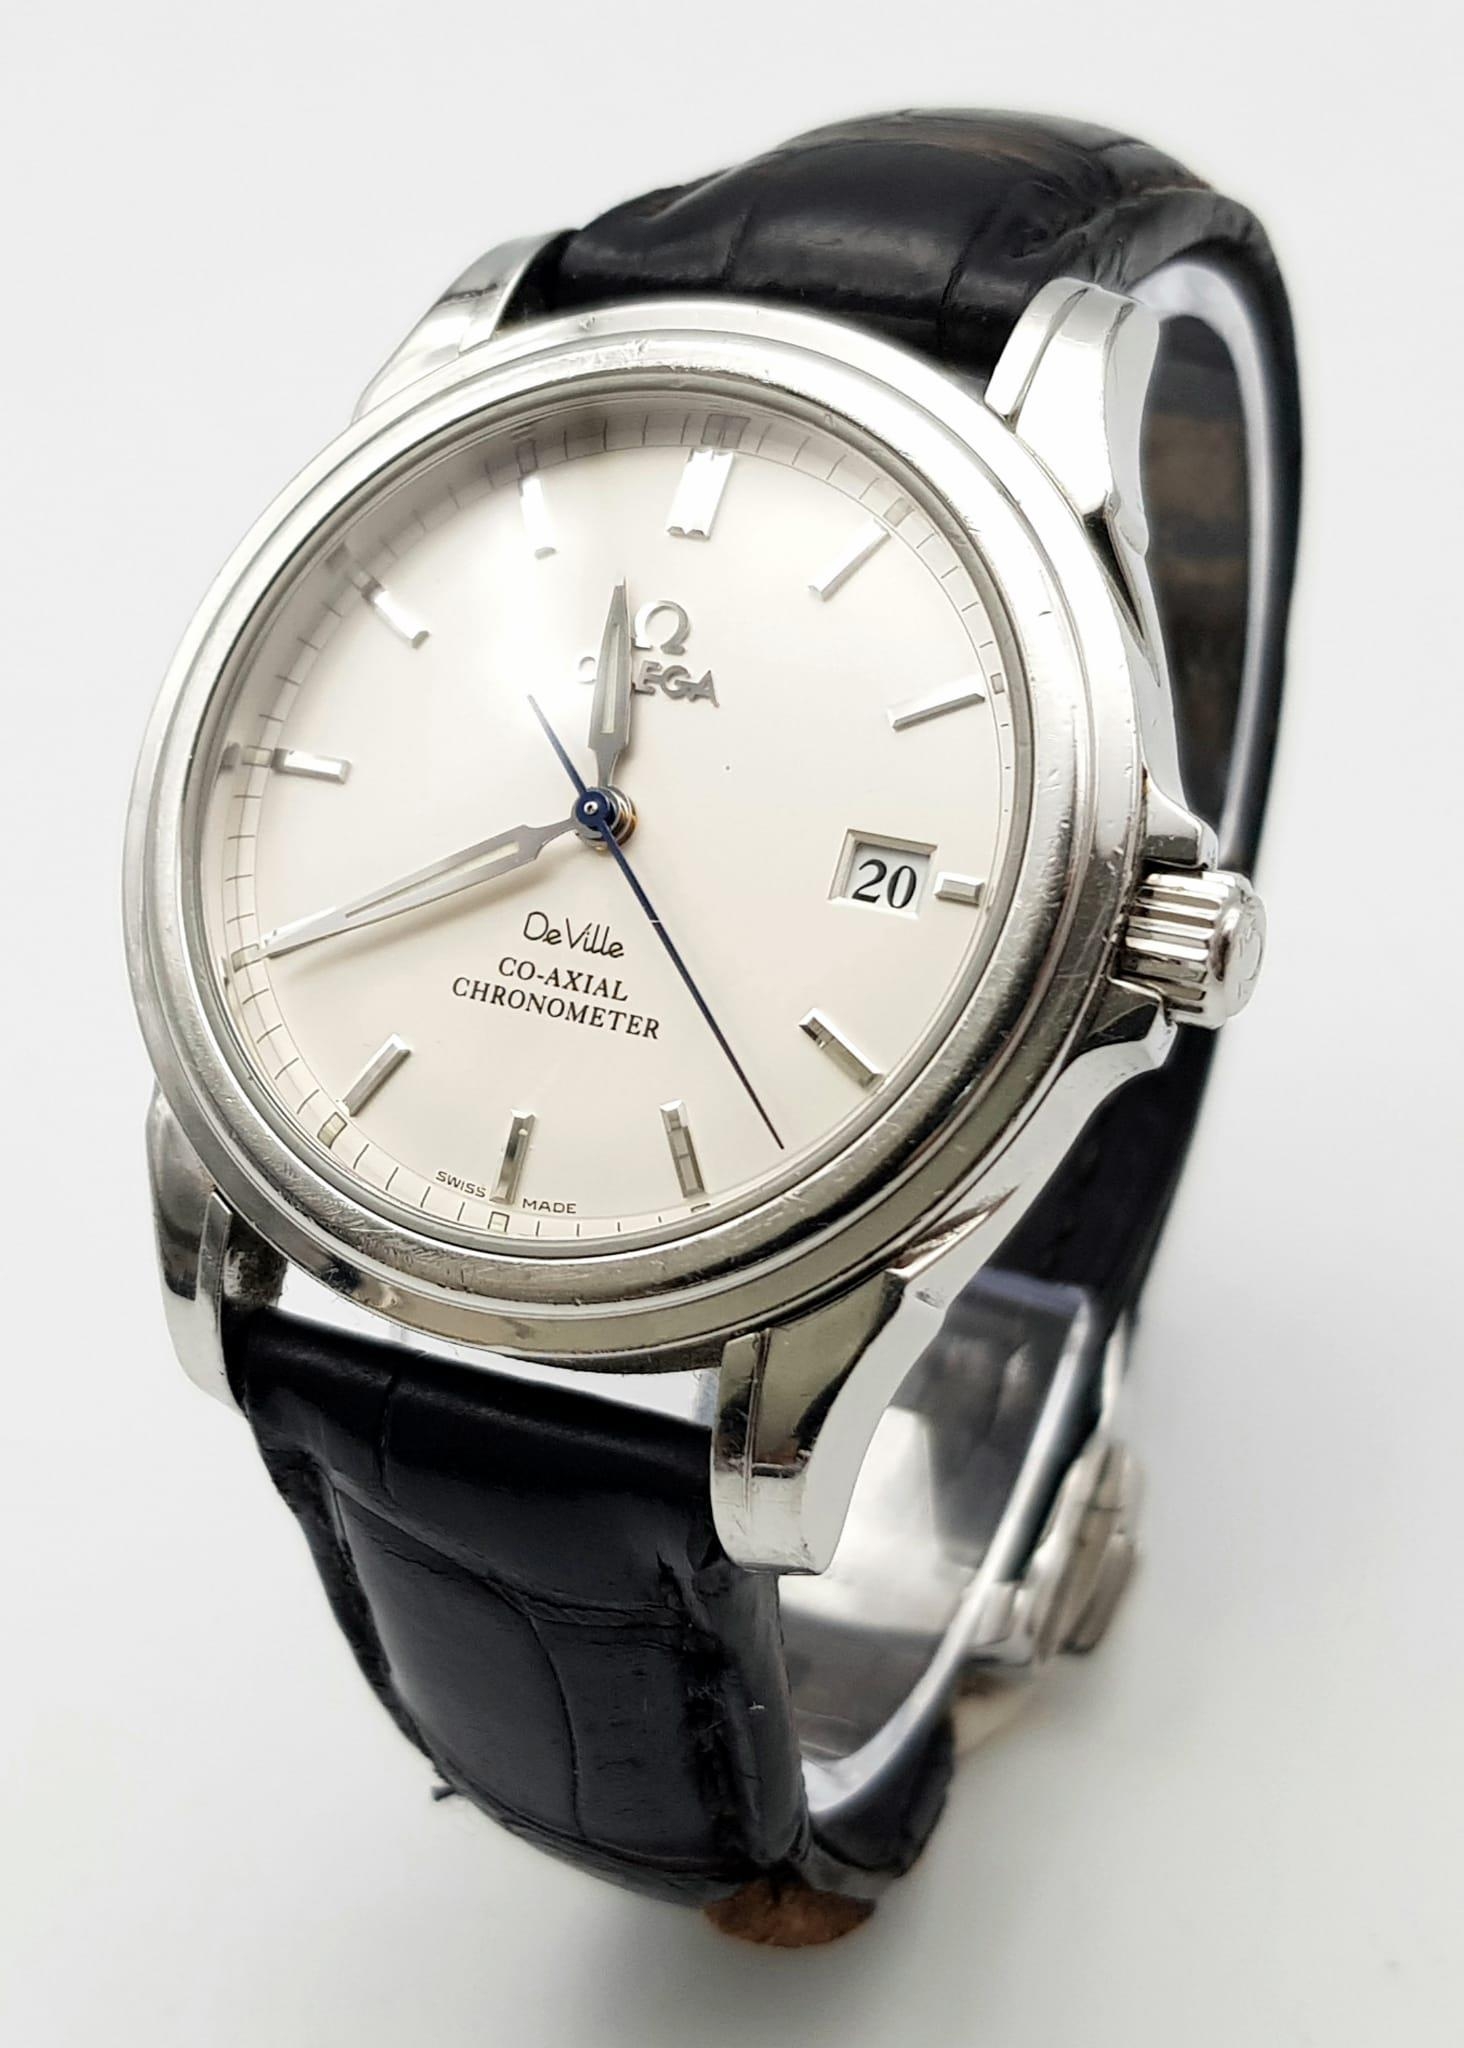 OMEGA DE VILLE CO AXIAL CHRONOMETER STAINLESS STEEL WATCH, WHITE FACE AND DIALS WITH BLACK LEATHER - Image 2 of 6